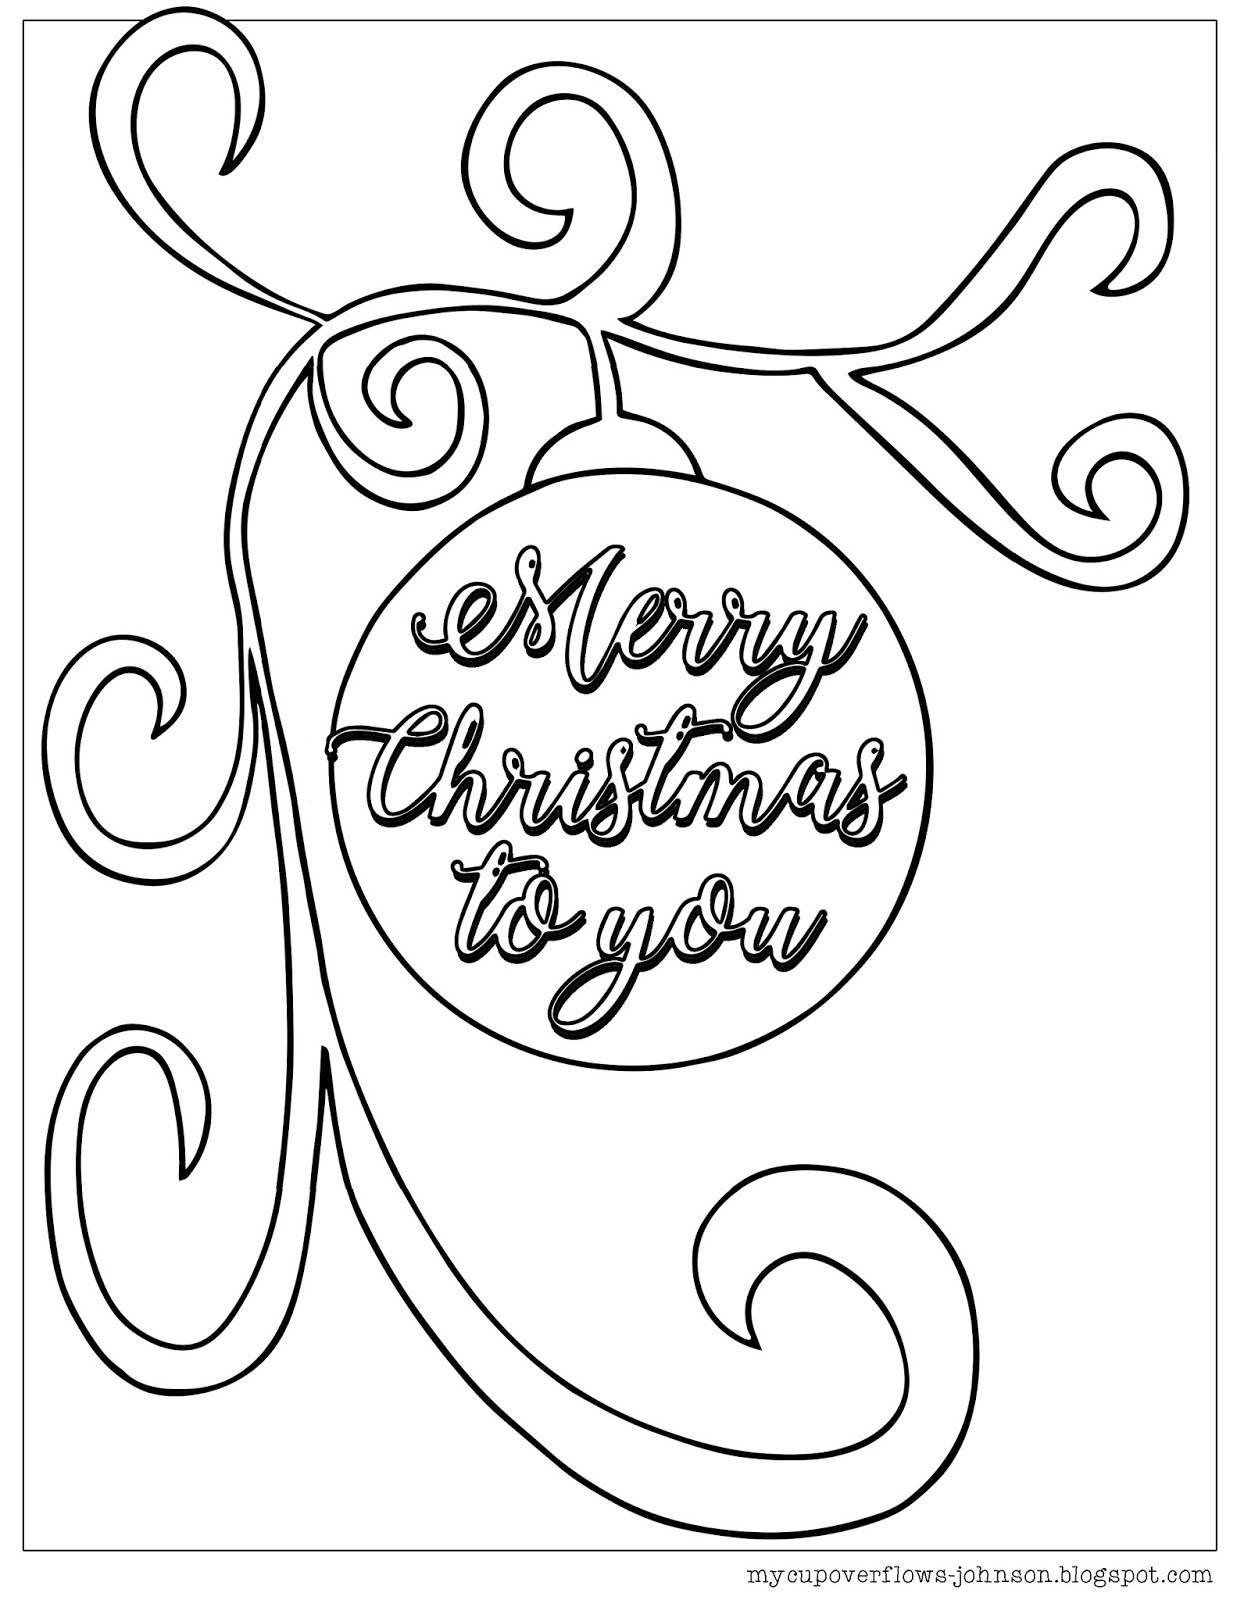 My Cup Overflows: Christmas Coloring Pages